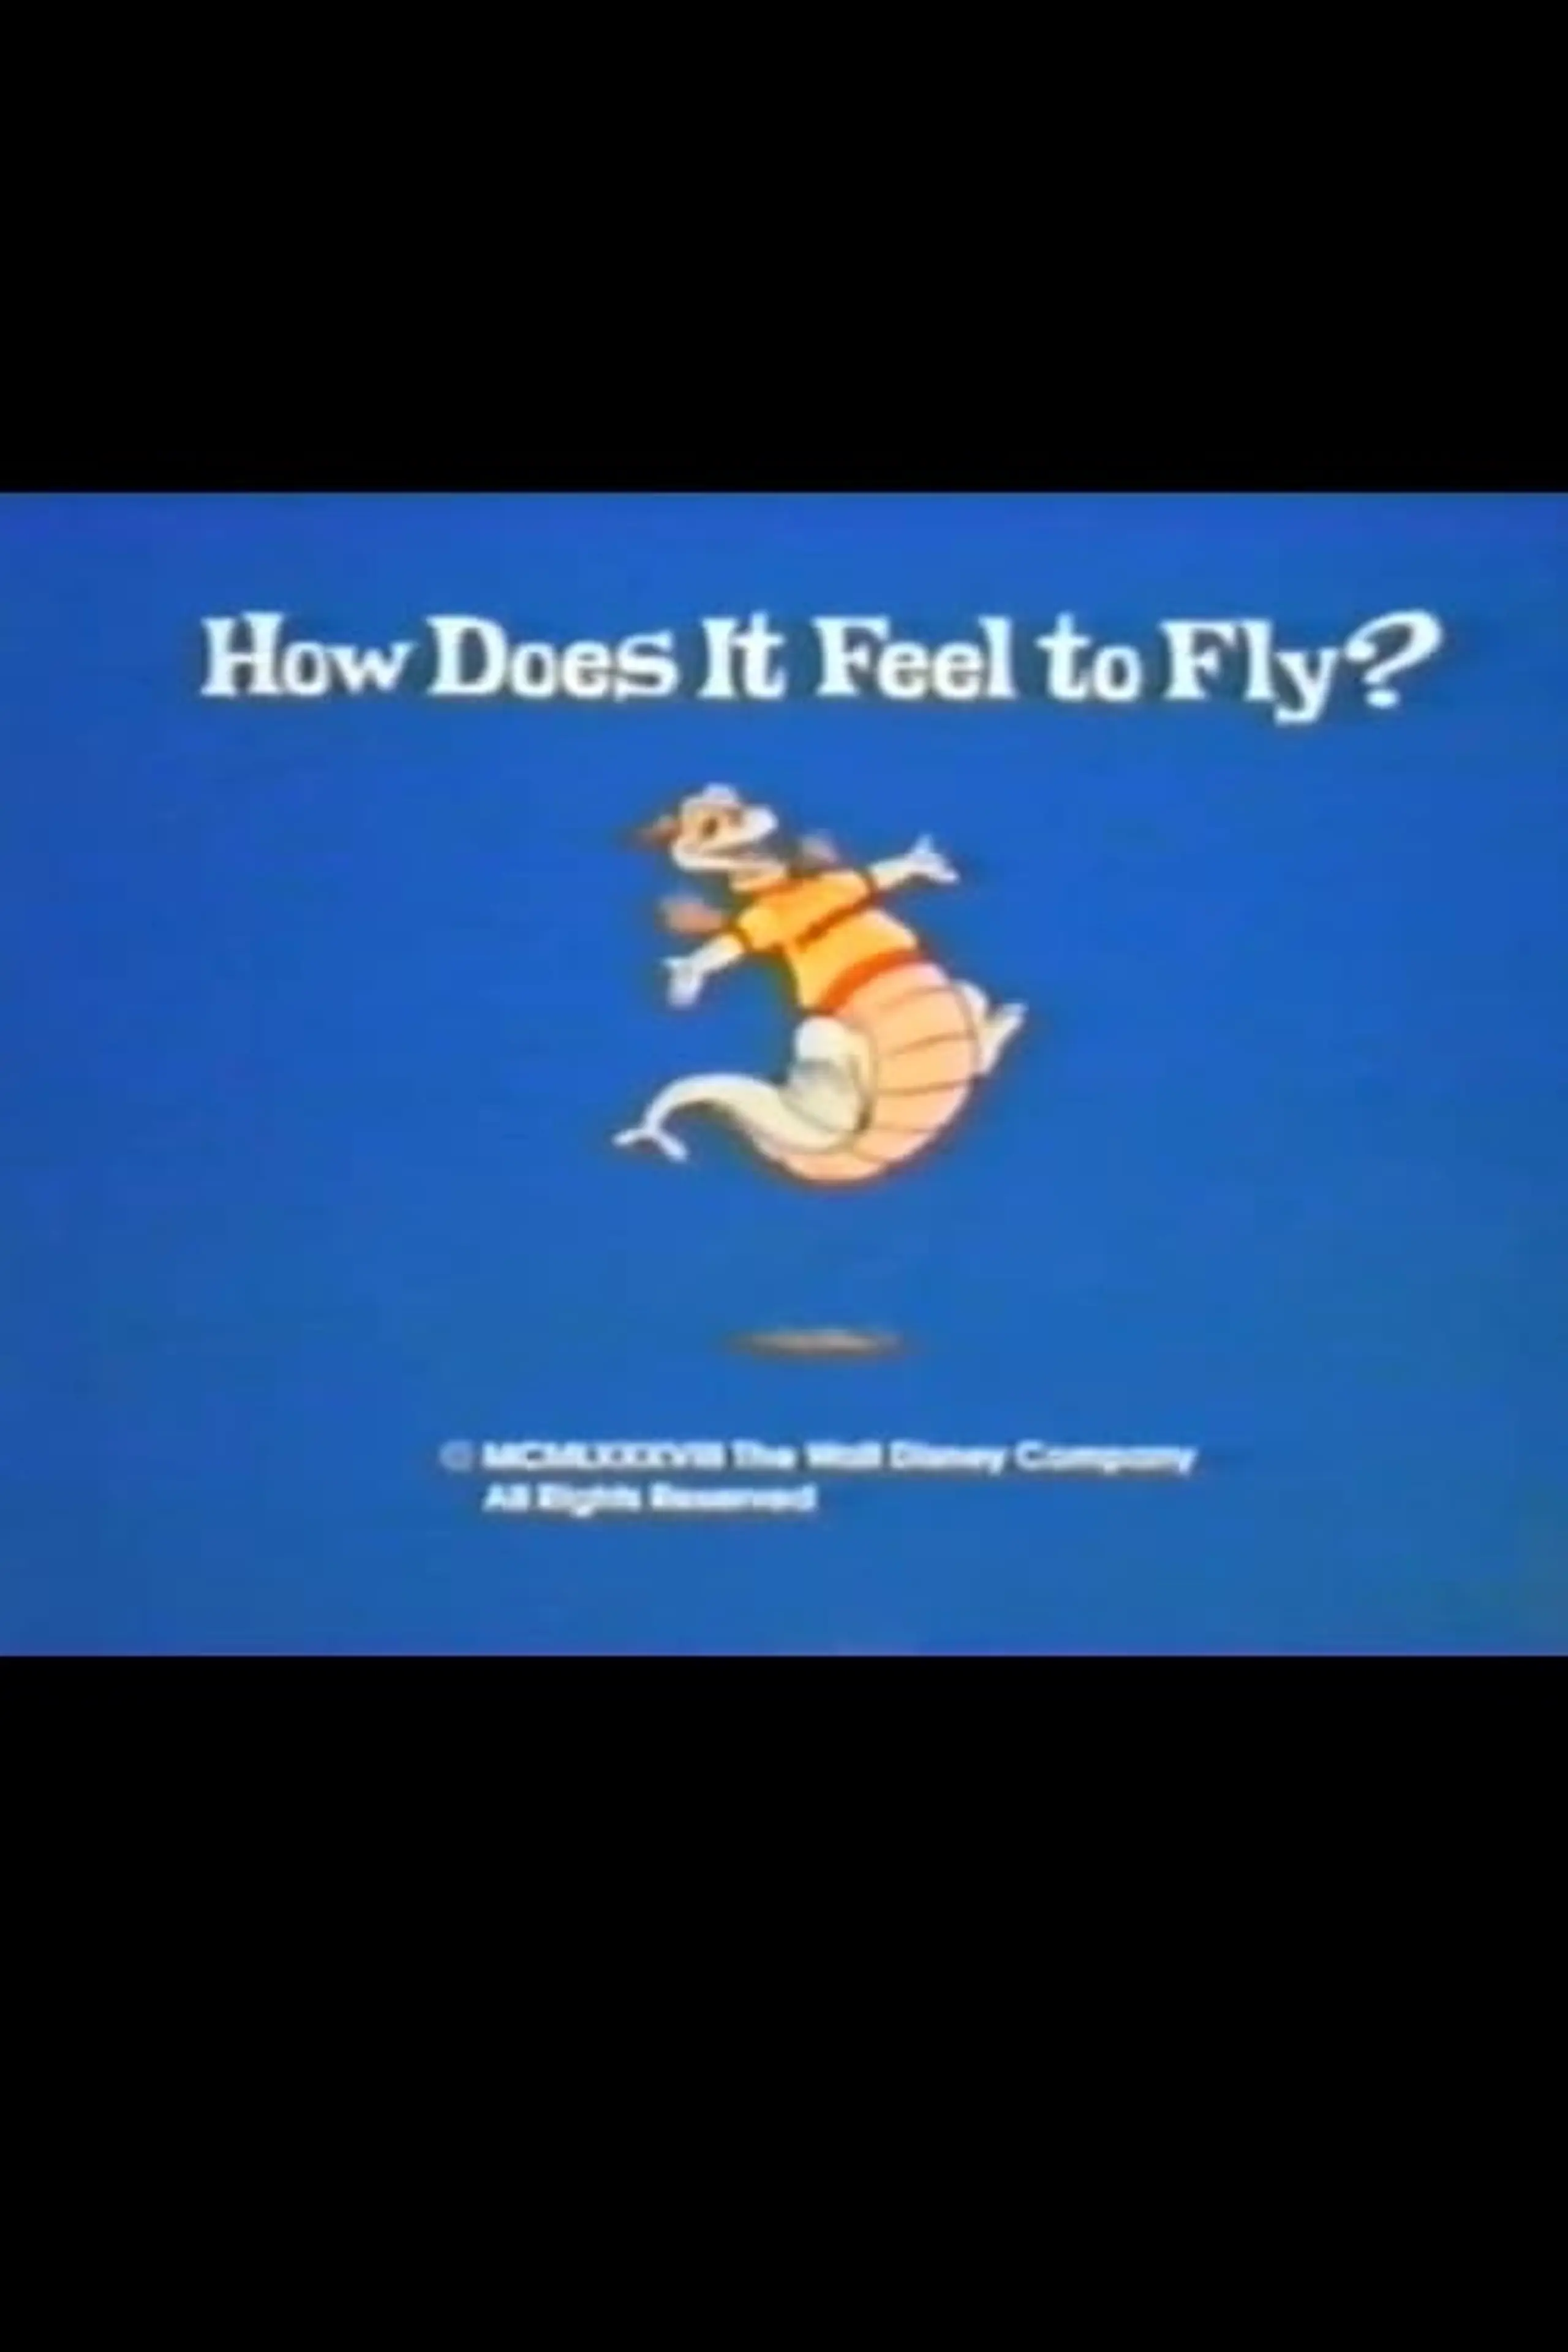 How Does It Feel to Fly?